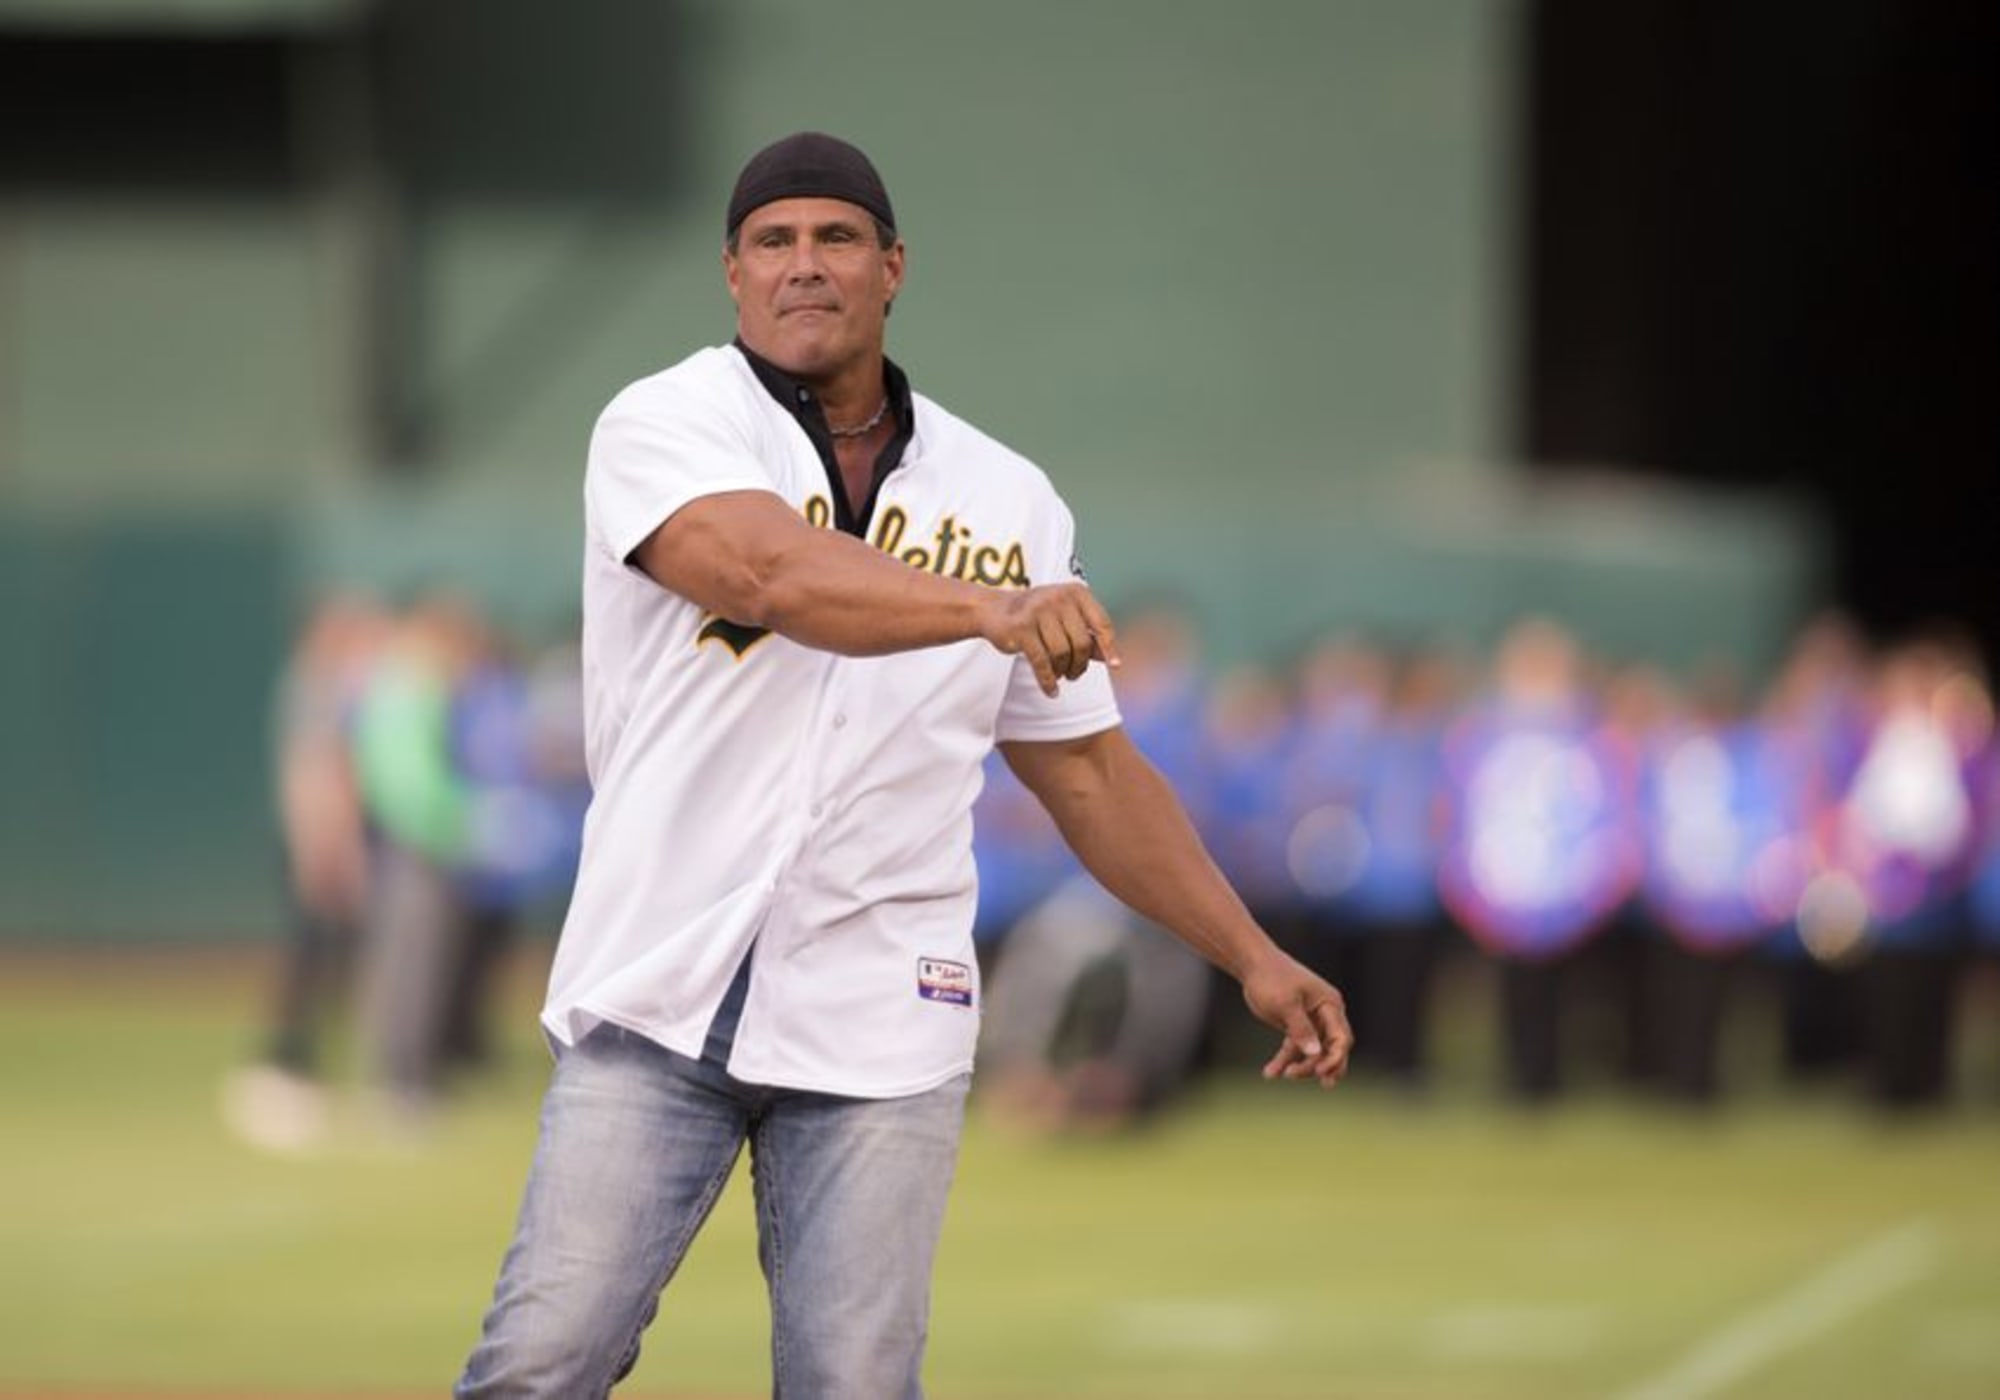 Jose Canseco: At the Very Least, He's 